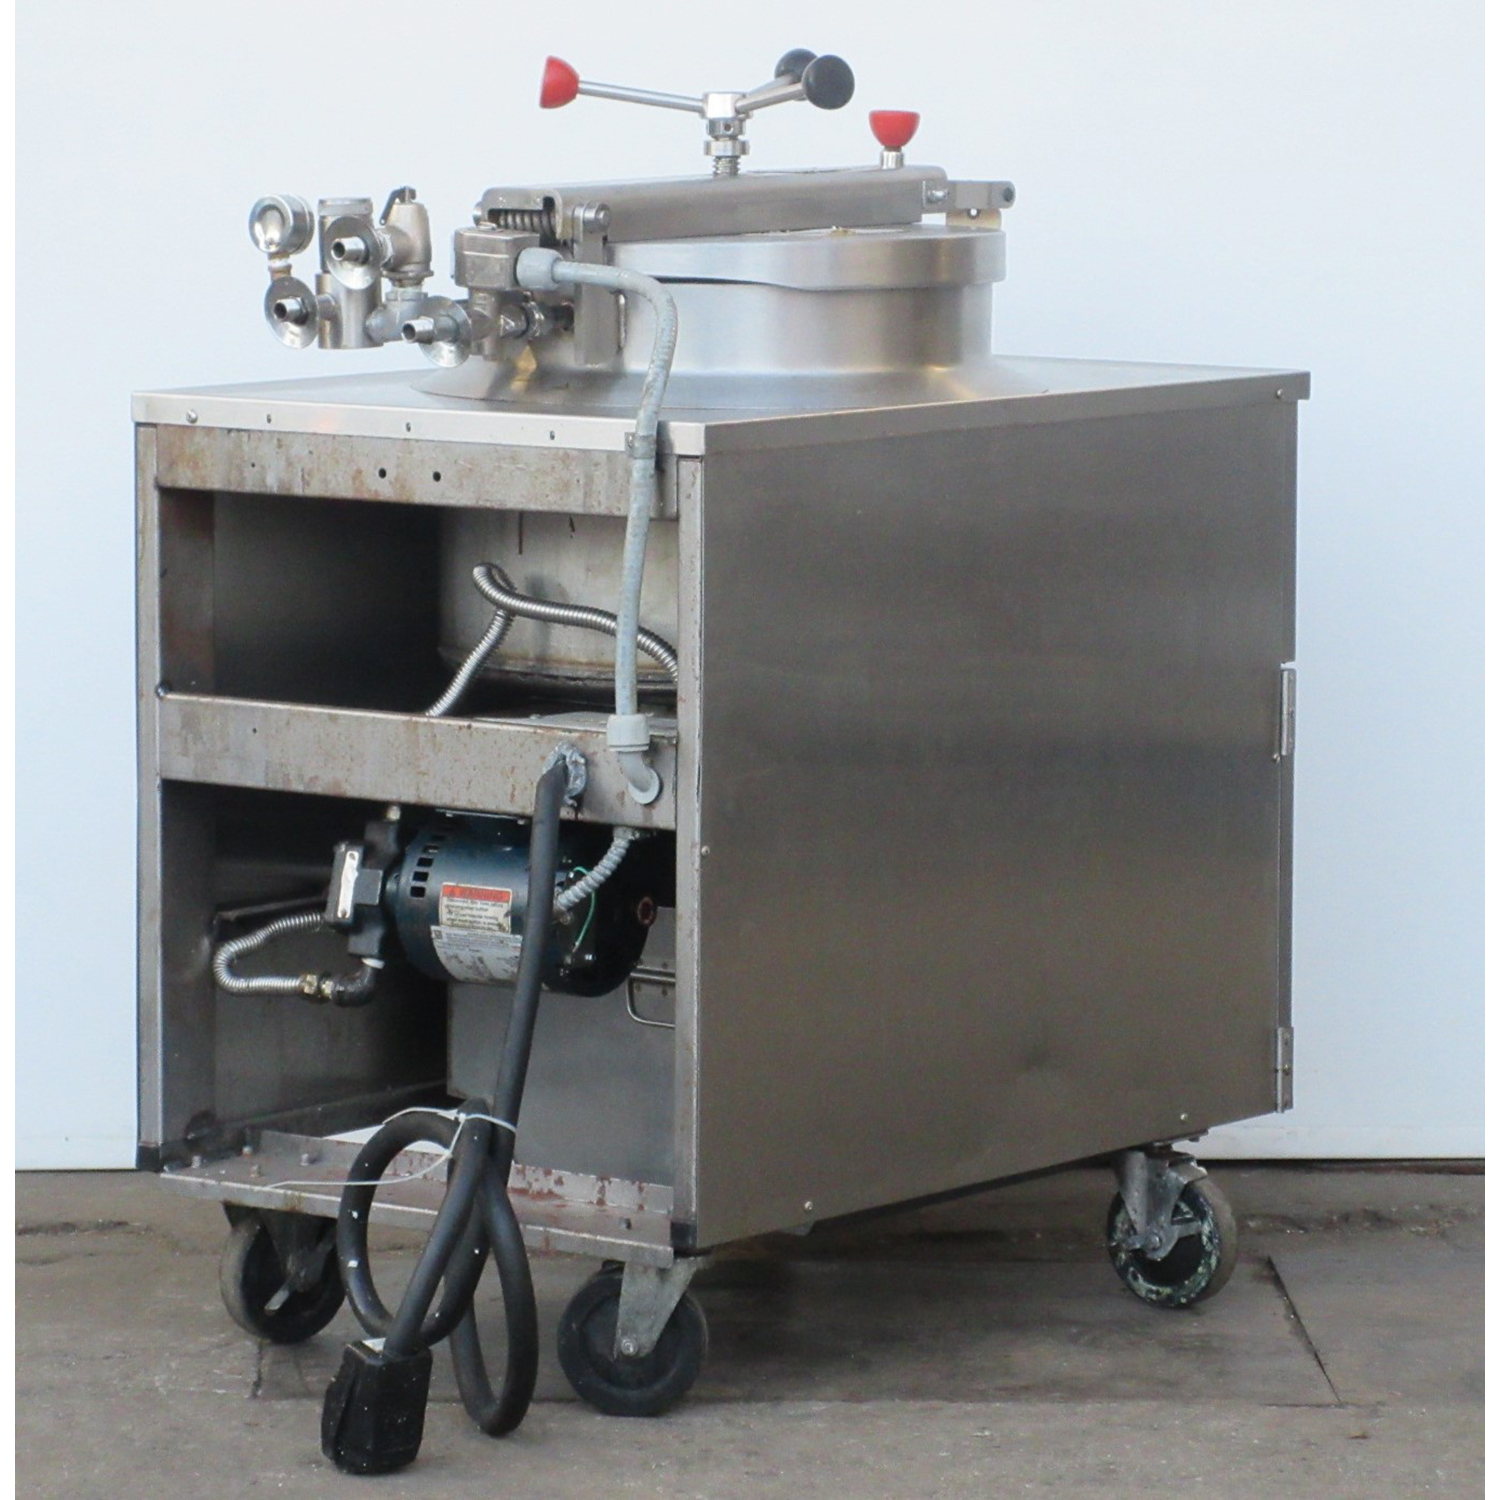 BKI FKM-F Electric Pressure Fryer, With Filtration, Used Excellent Condition image 5